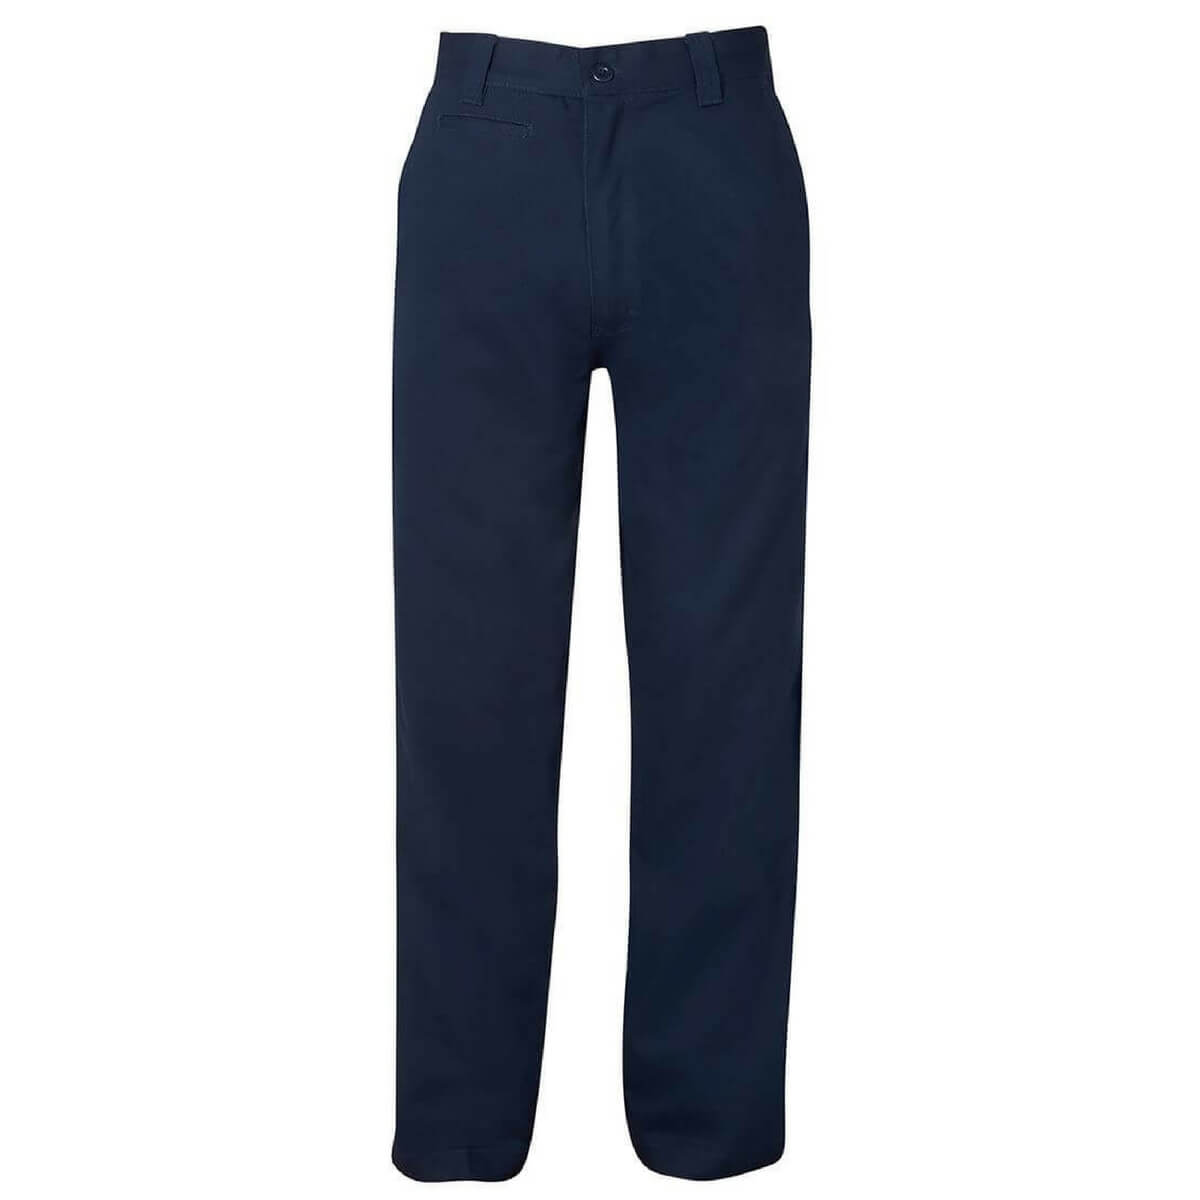 Garment Washed Flat Front Trouser - Stone Cotton Drill – Natalino